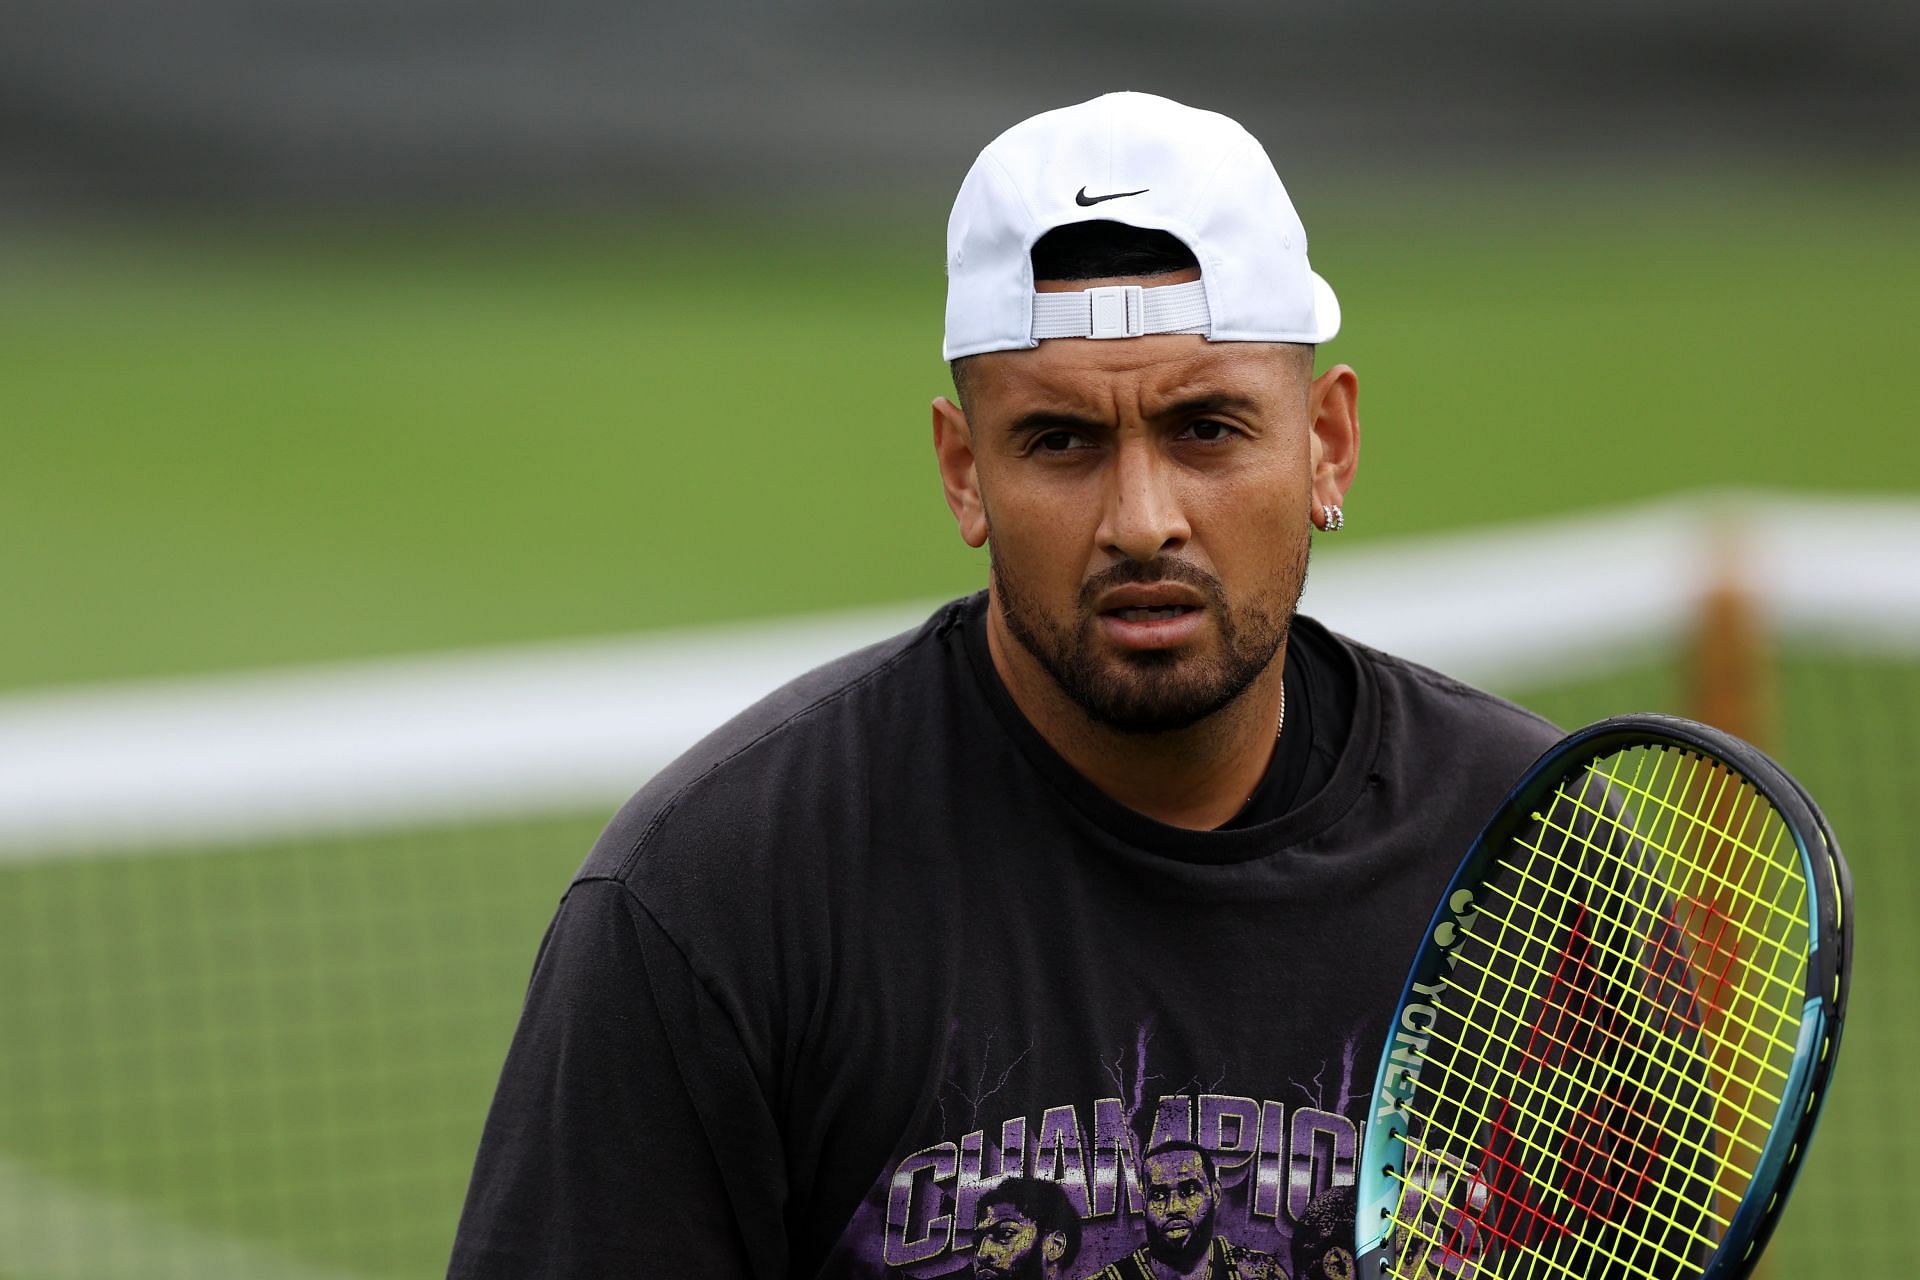 Nick Kyrgios talked about his childhood days